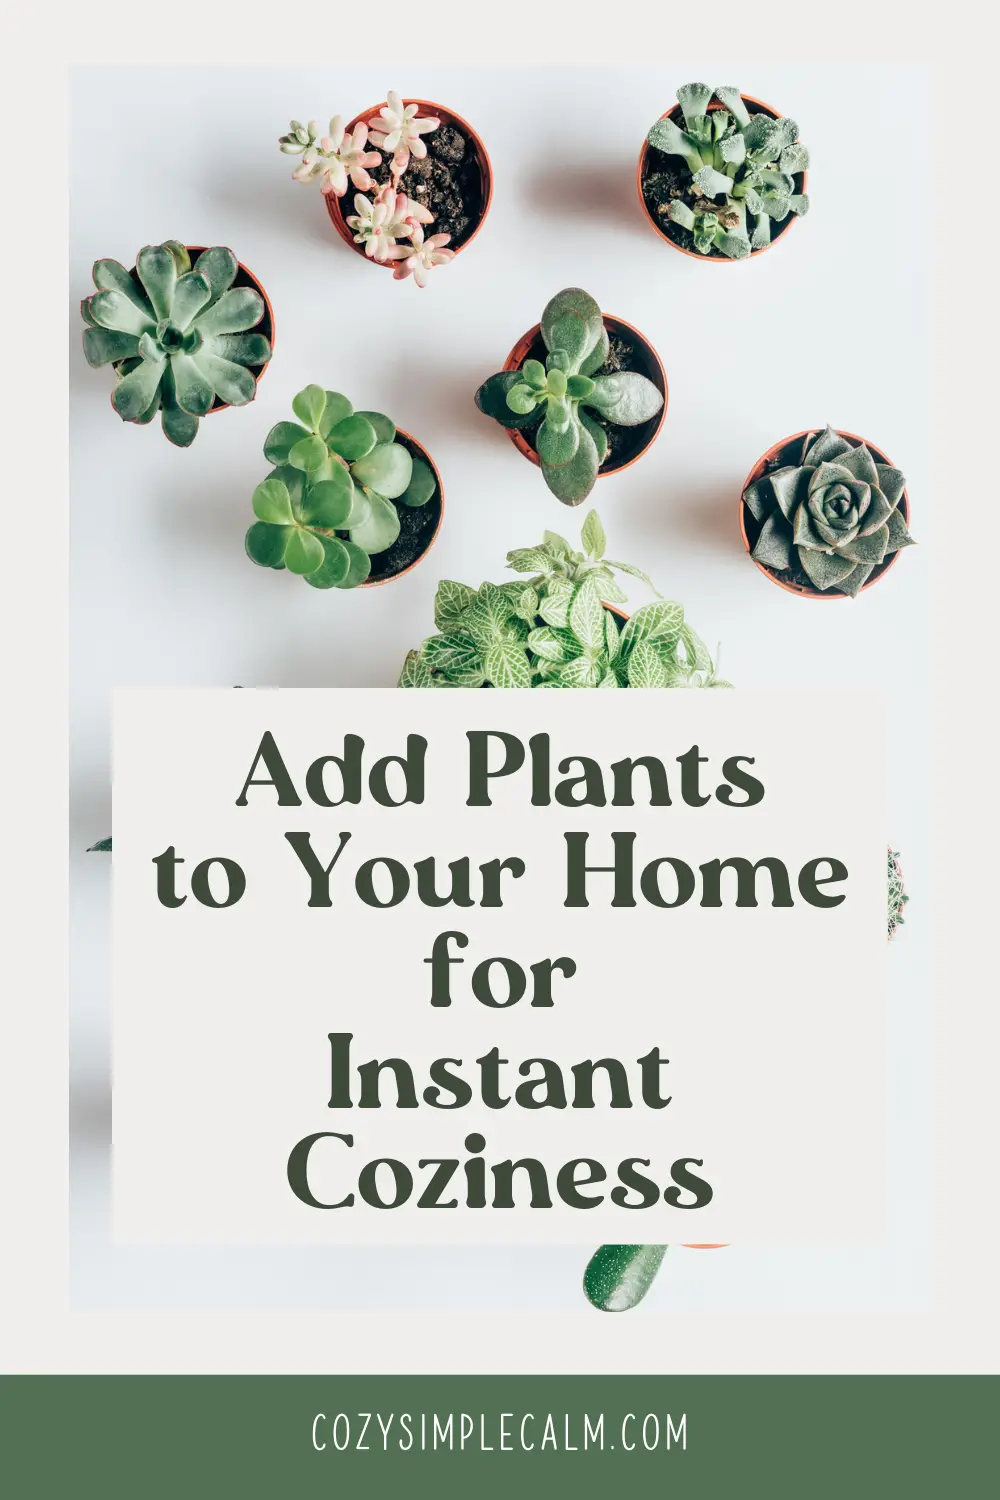 Image of various potted succulents - Text overlay: Add plants to your home for instant coziness - cozyimplecalm.com